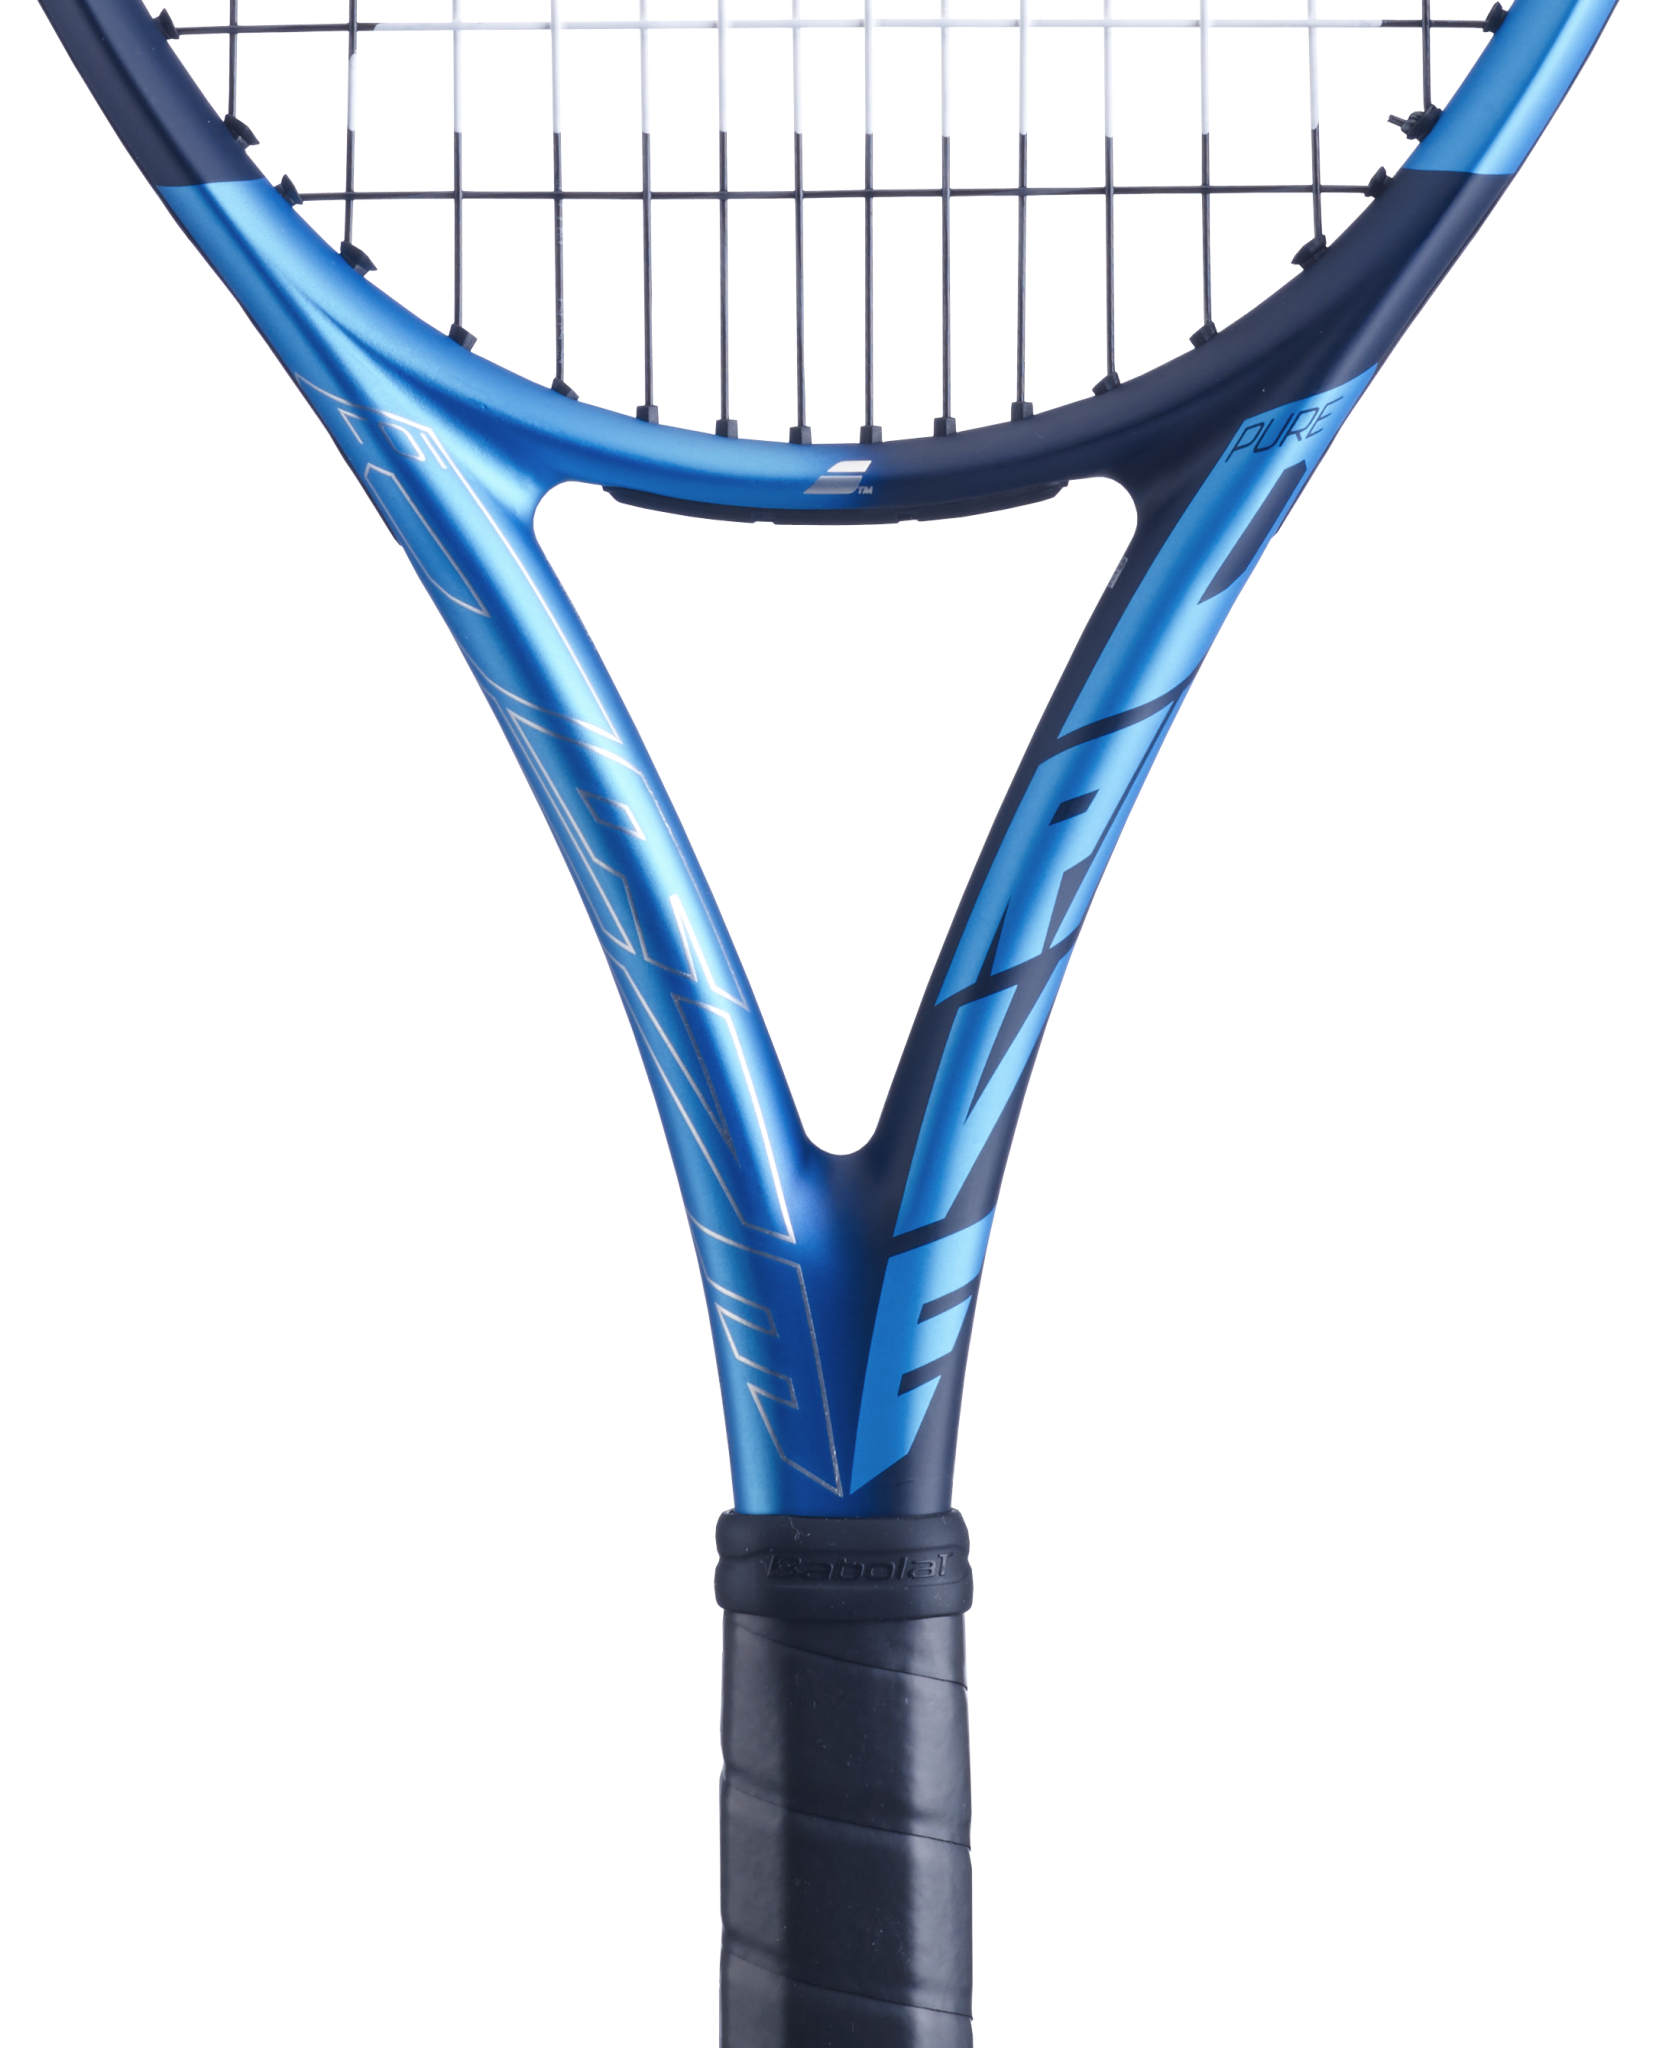 Babolat Pure Drive 107 Tennis Racquets, 2021 - Cayman Sports 